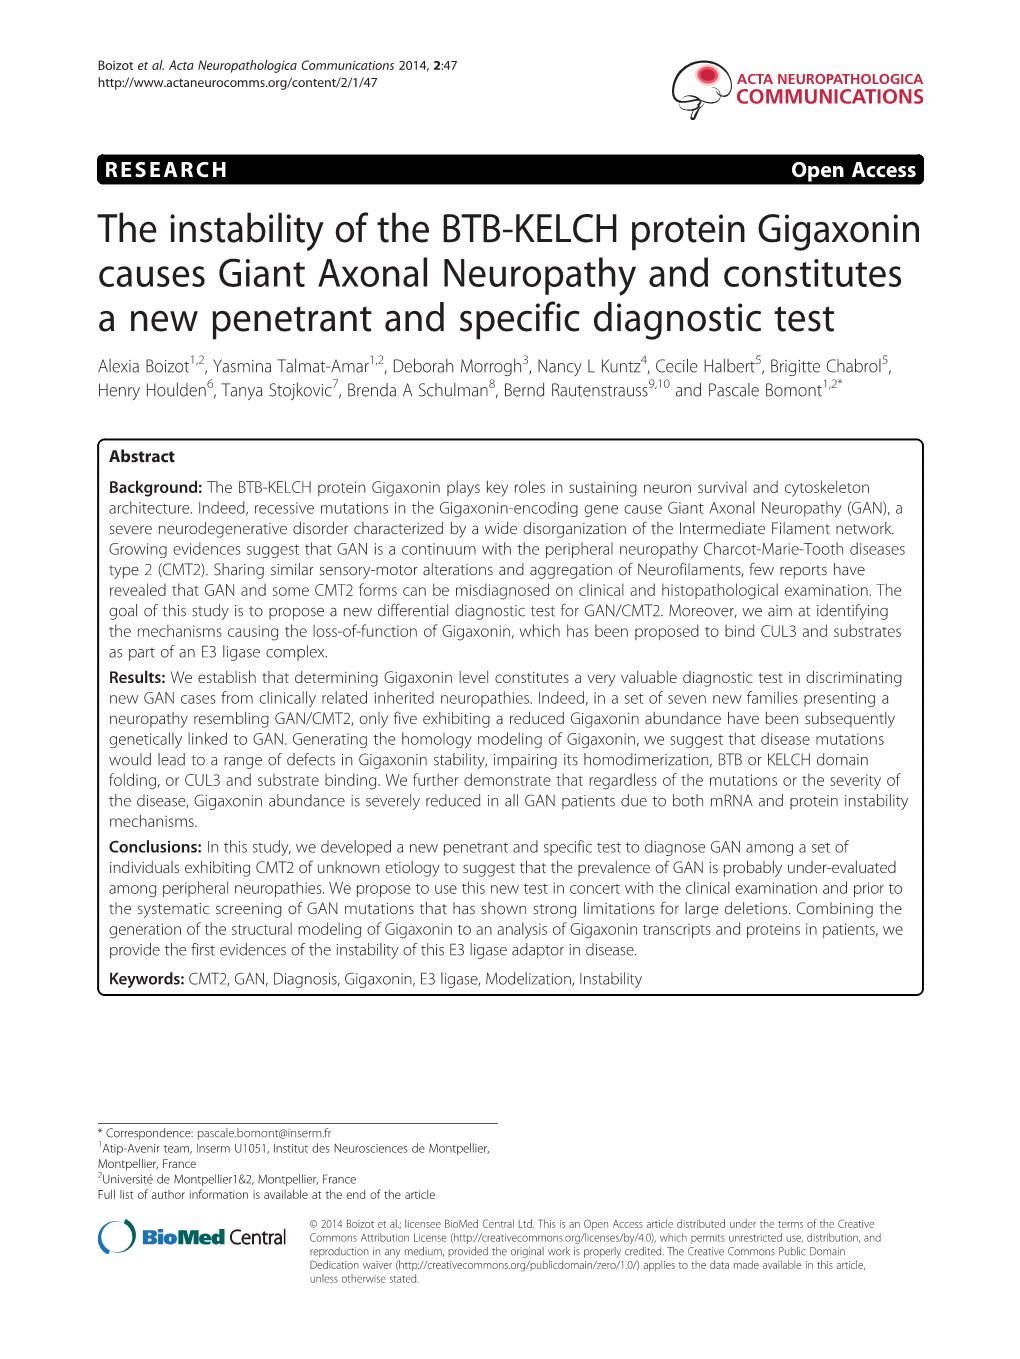 The Instability of the BTB-KELCH Protein Gigaxonin Causes Giant